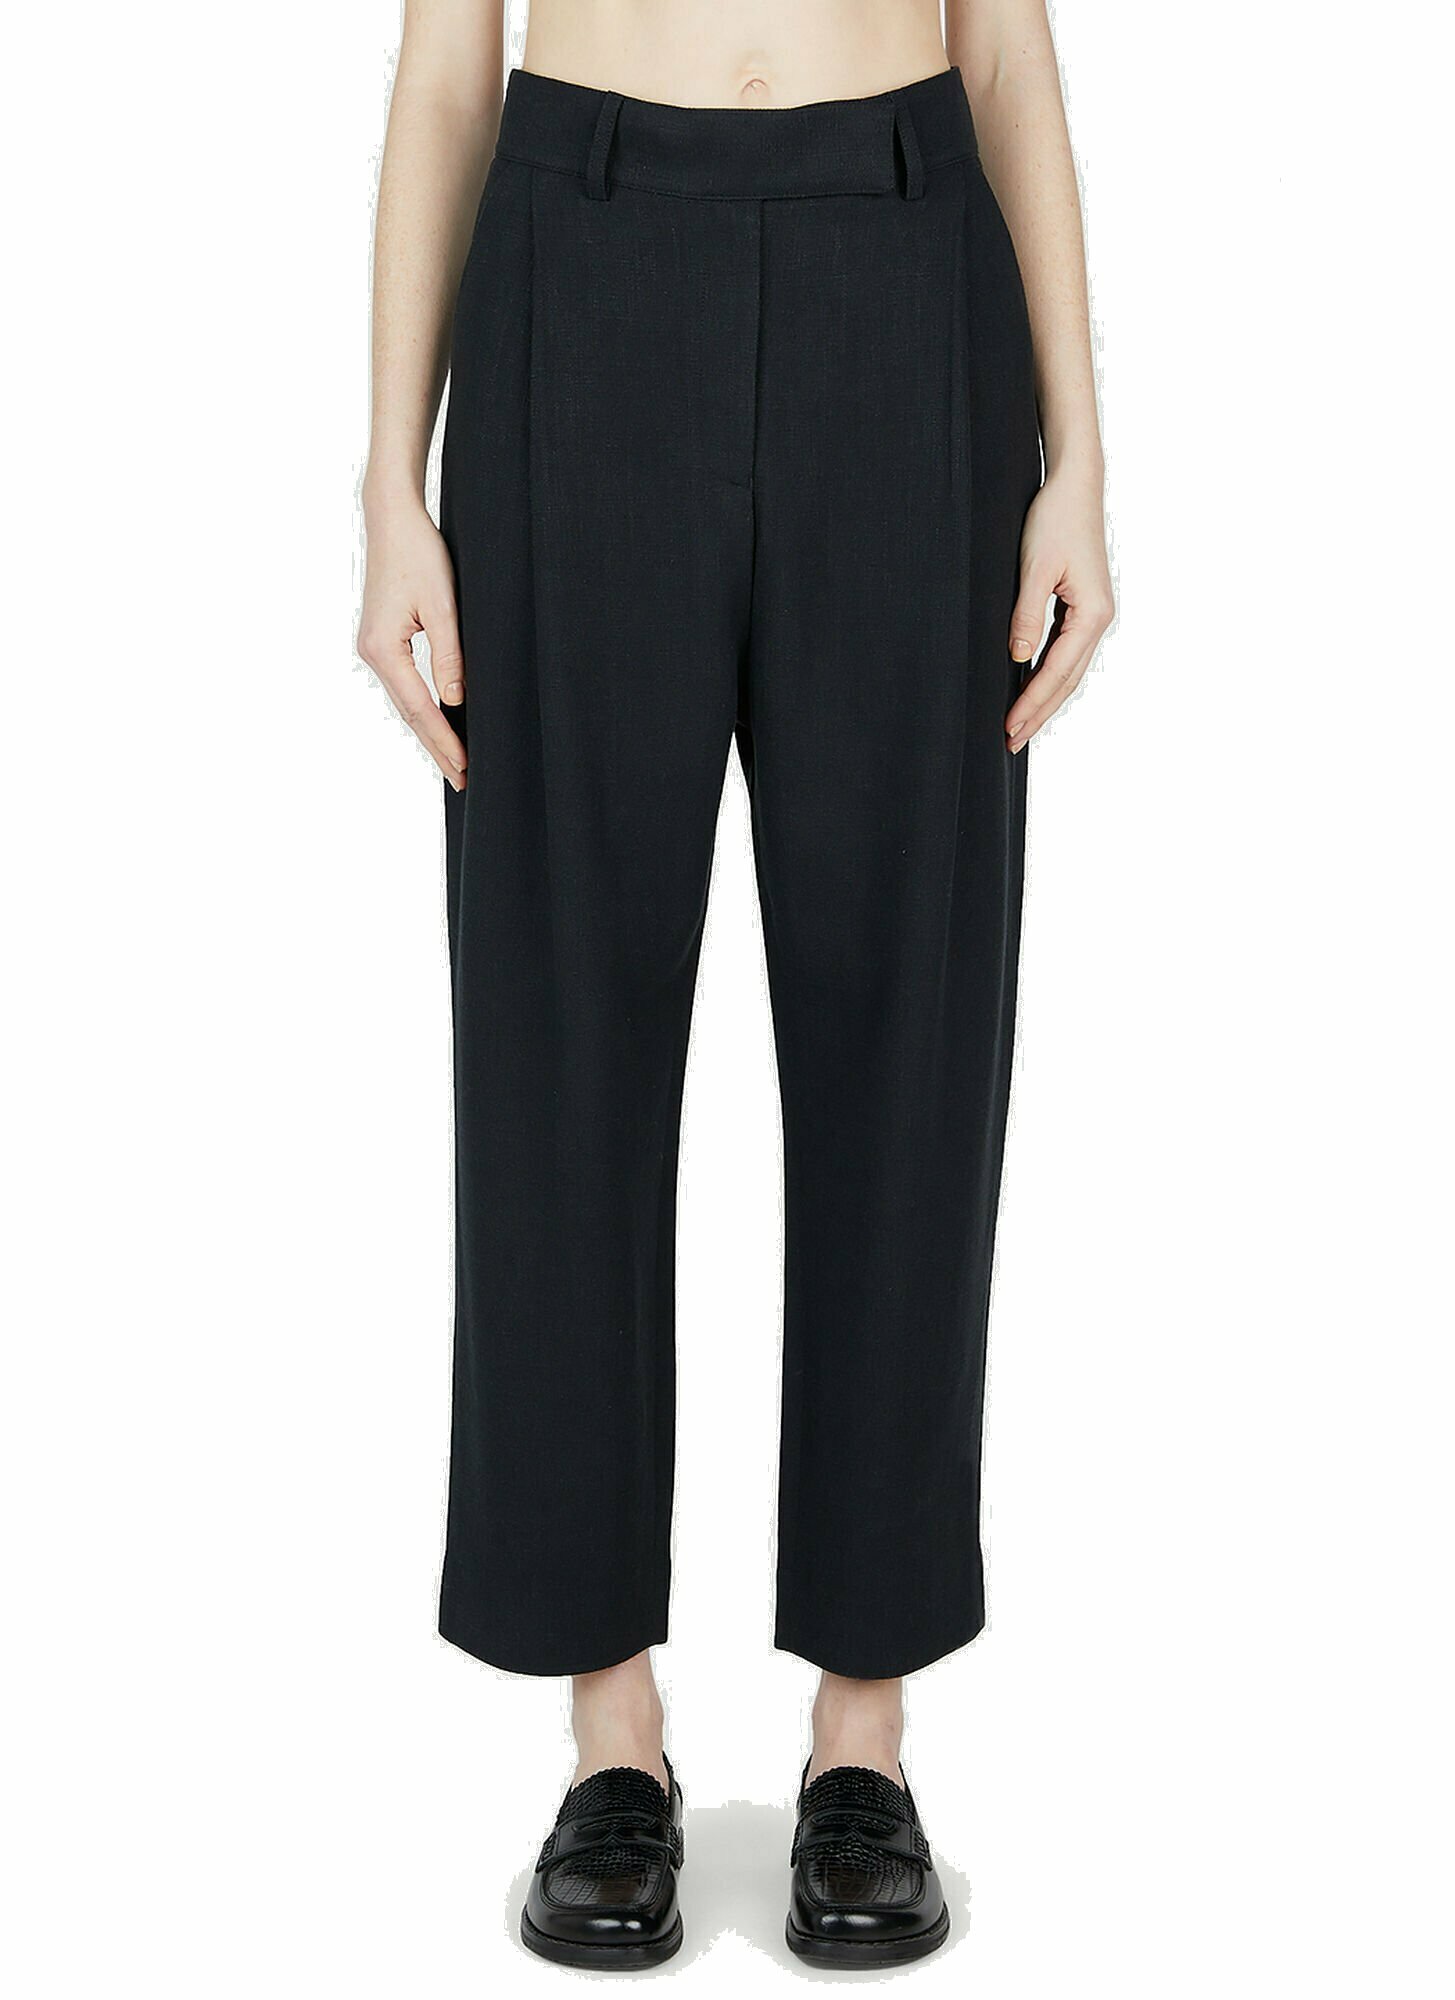 TOTEME - Pleated Pants in Black Toteme